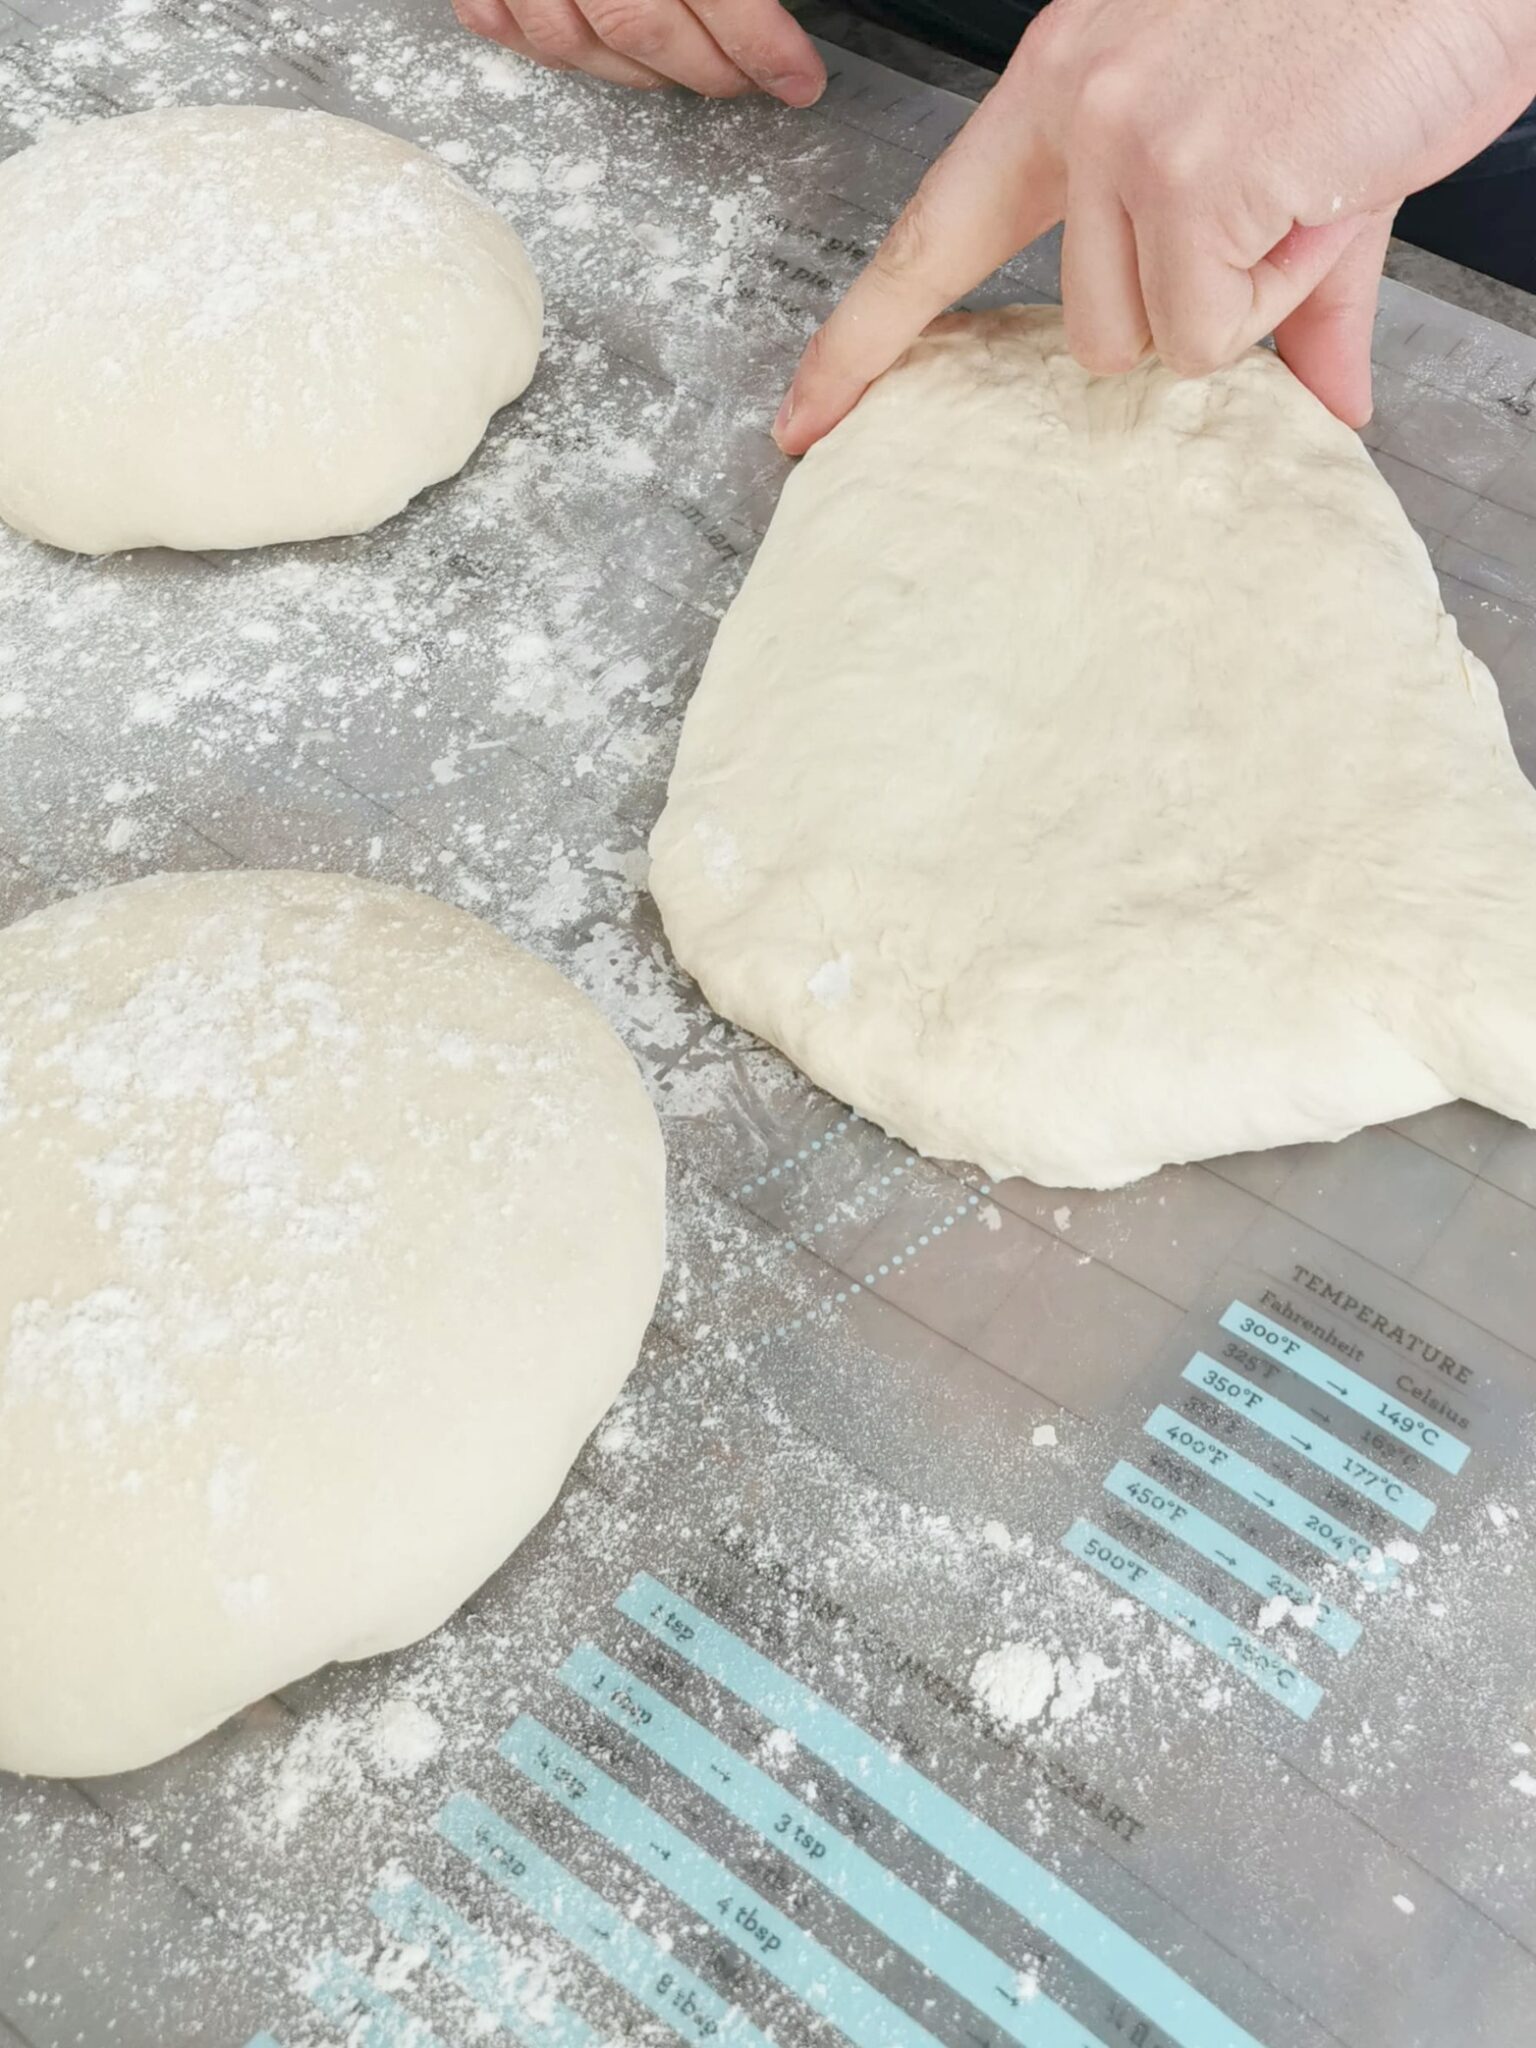 Dough being shaped into triangle shapes prior to shaping into loaves.